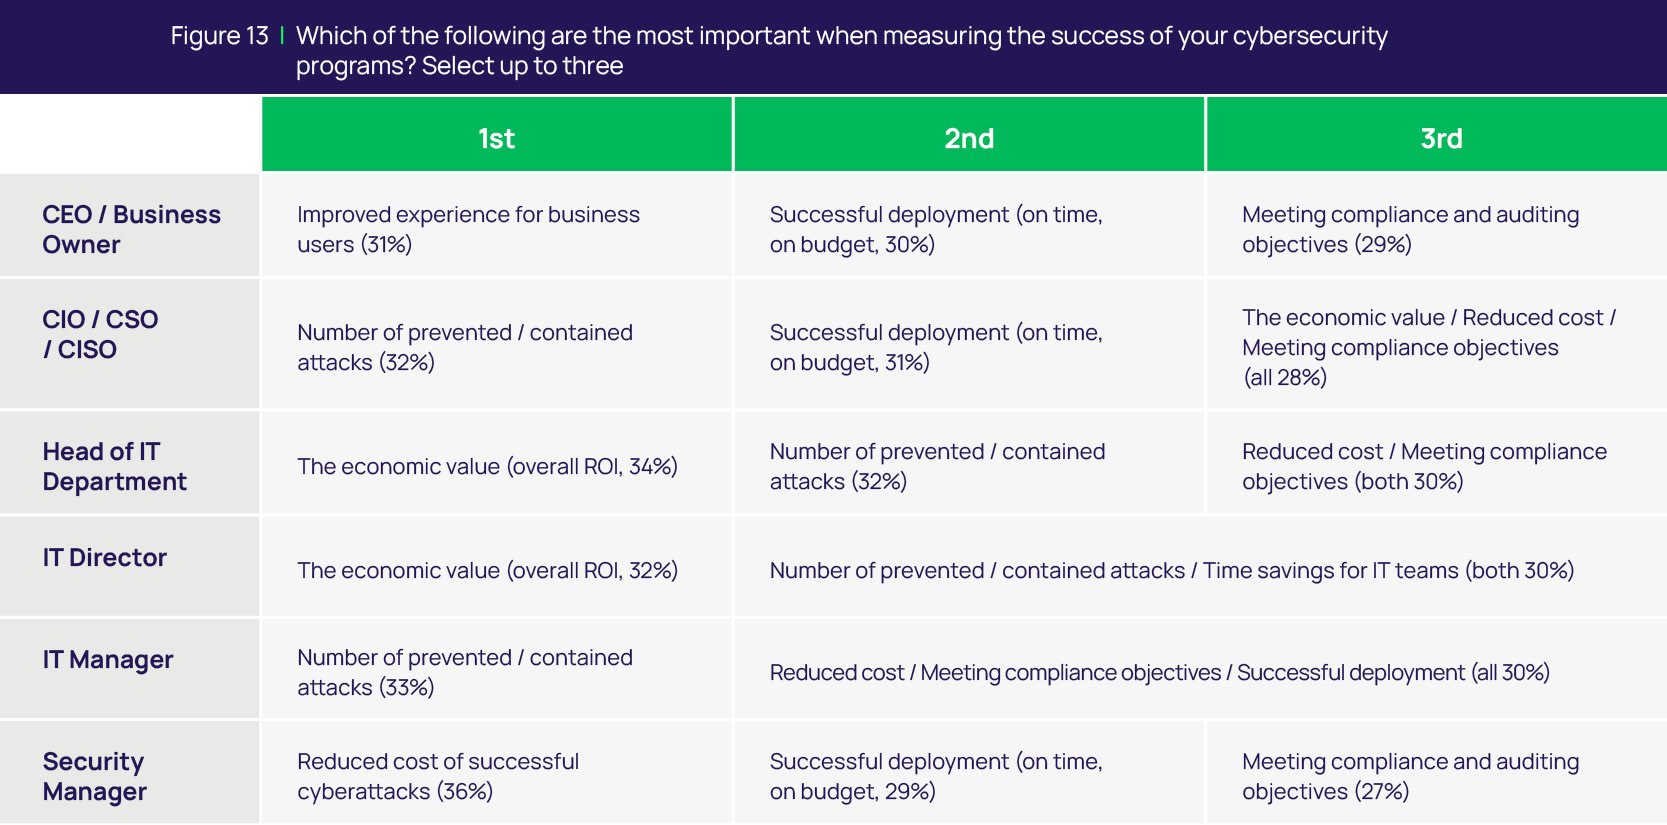 Which are the most important when measuring the success of your cybersecurity programs?